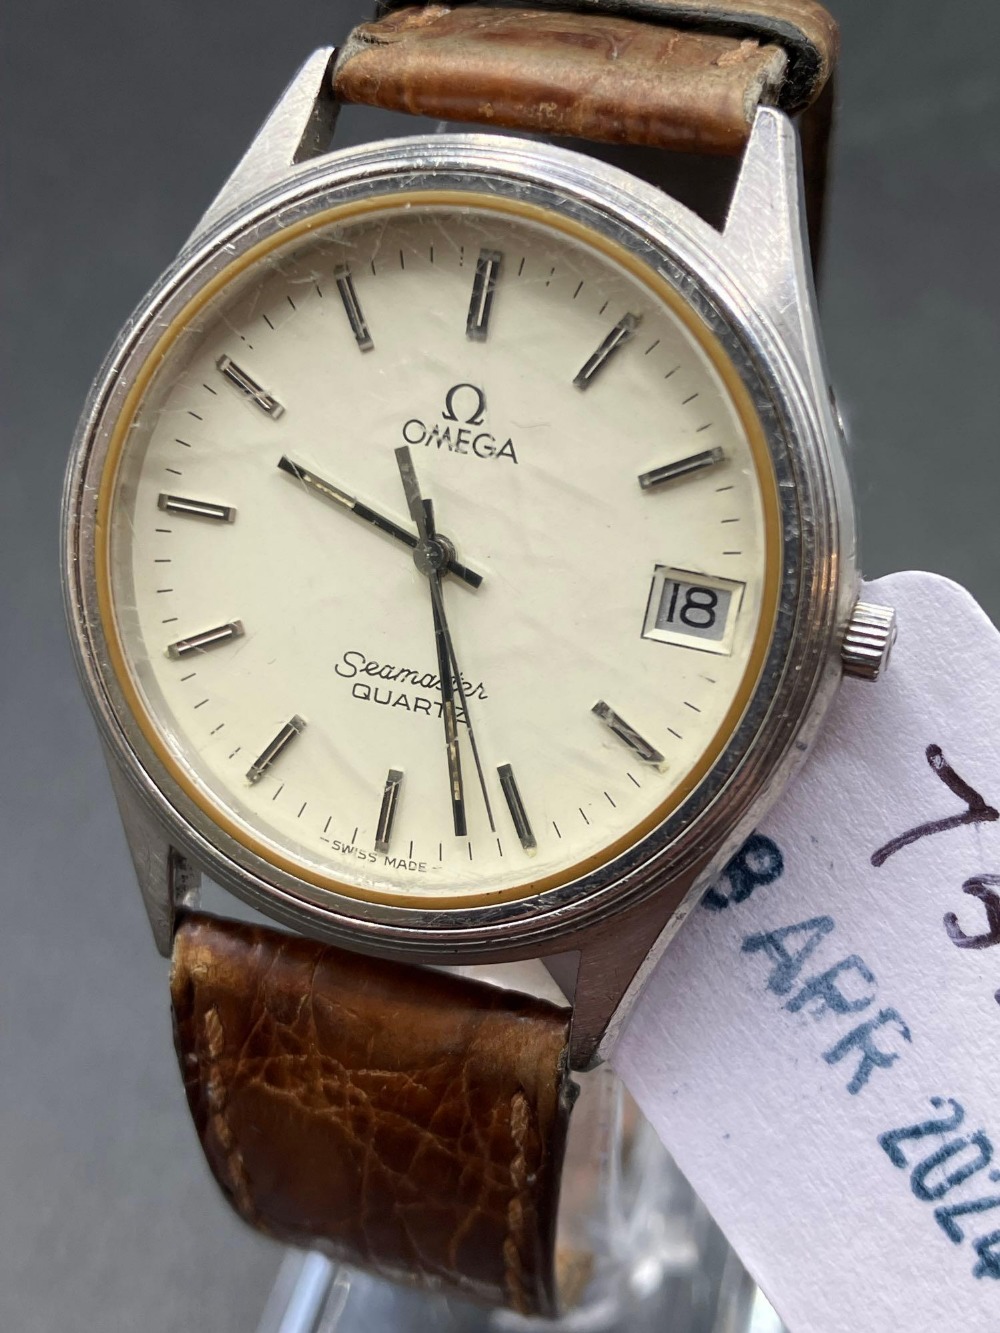 A gents OMEGA sea master quartz wrist watch with leather strap seconds sweep and date aperture